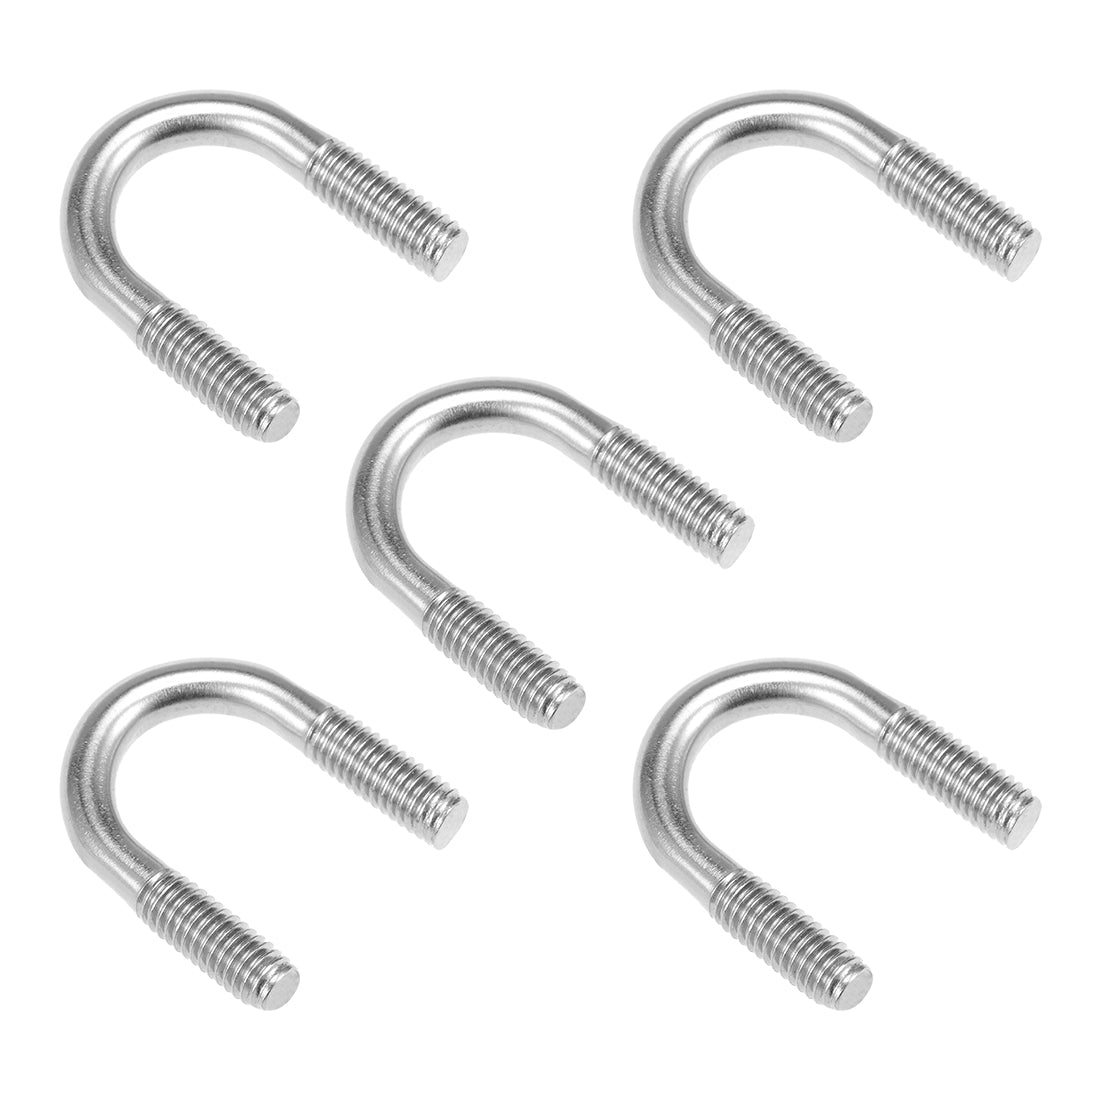 uxcell Uxcell U-Bolts 17mm Inner Width 304 Stainless Steel M6 U-Bolt for 16mm Pipe Dia 5pcs